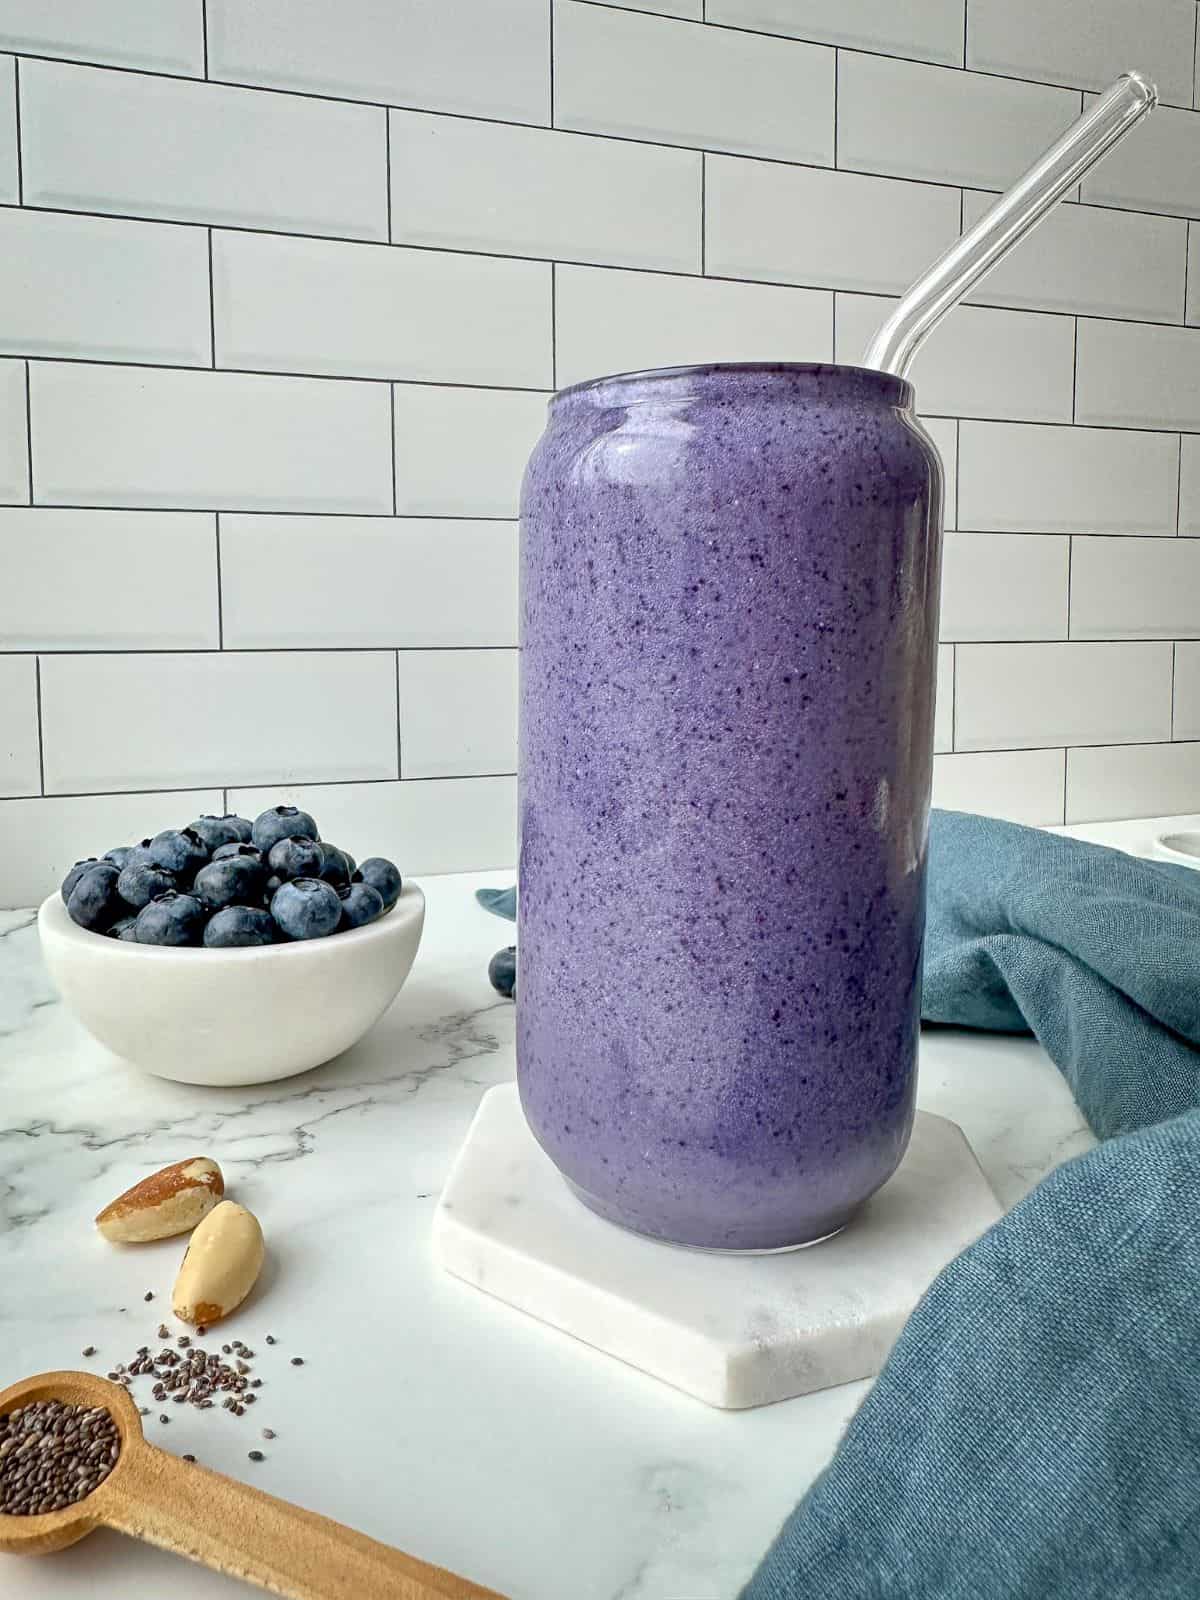 A purple smoothie in a clear glass. A bowl of blueberries, Brazil nuts, and chia seeds are on a marble table with a blue kitchen towel.